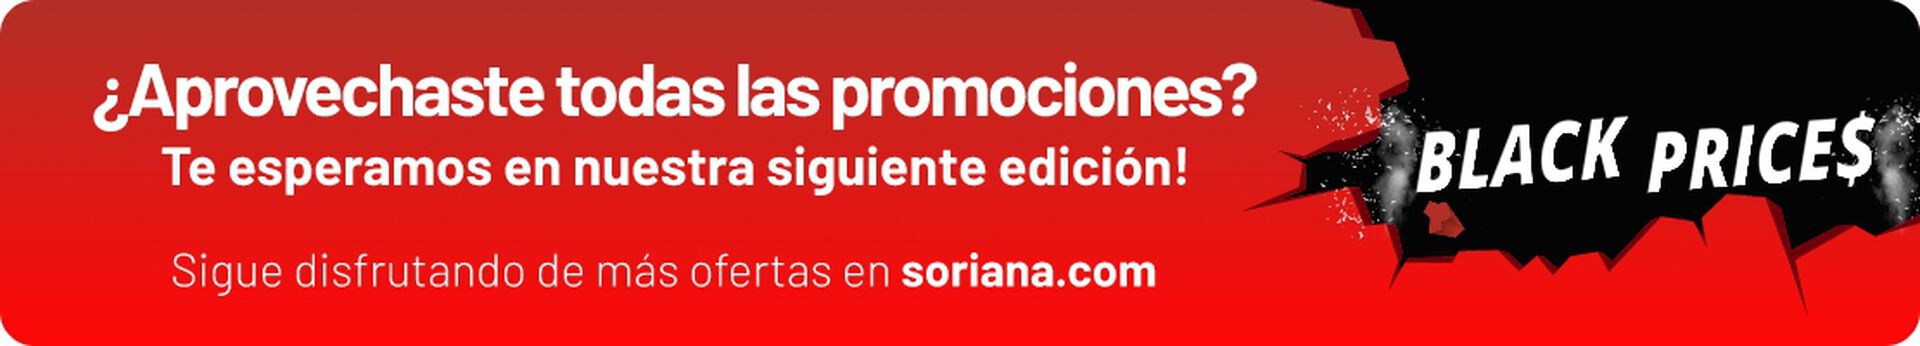 Banner promocional Black Prices